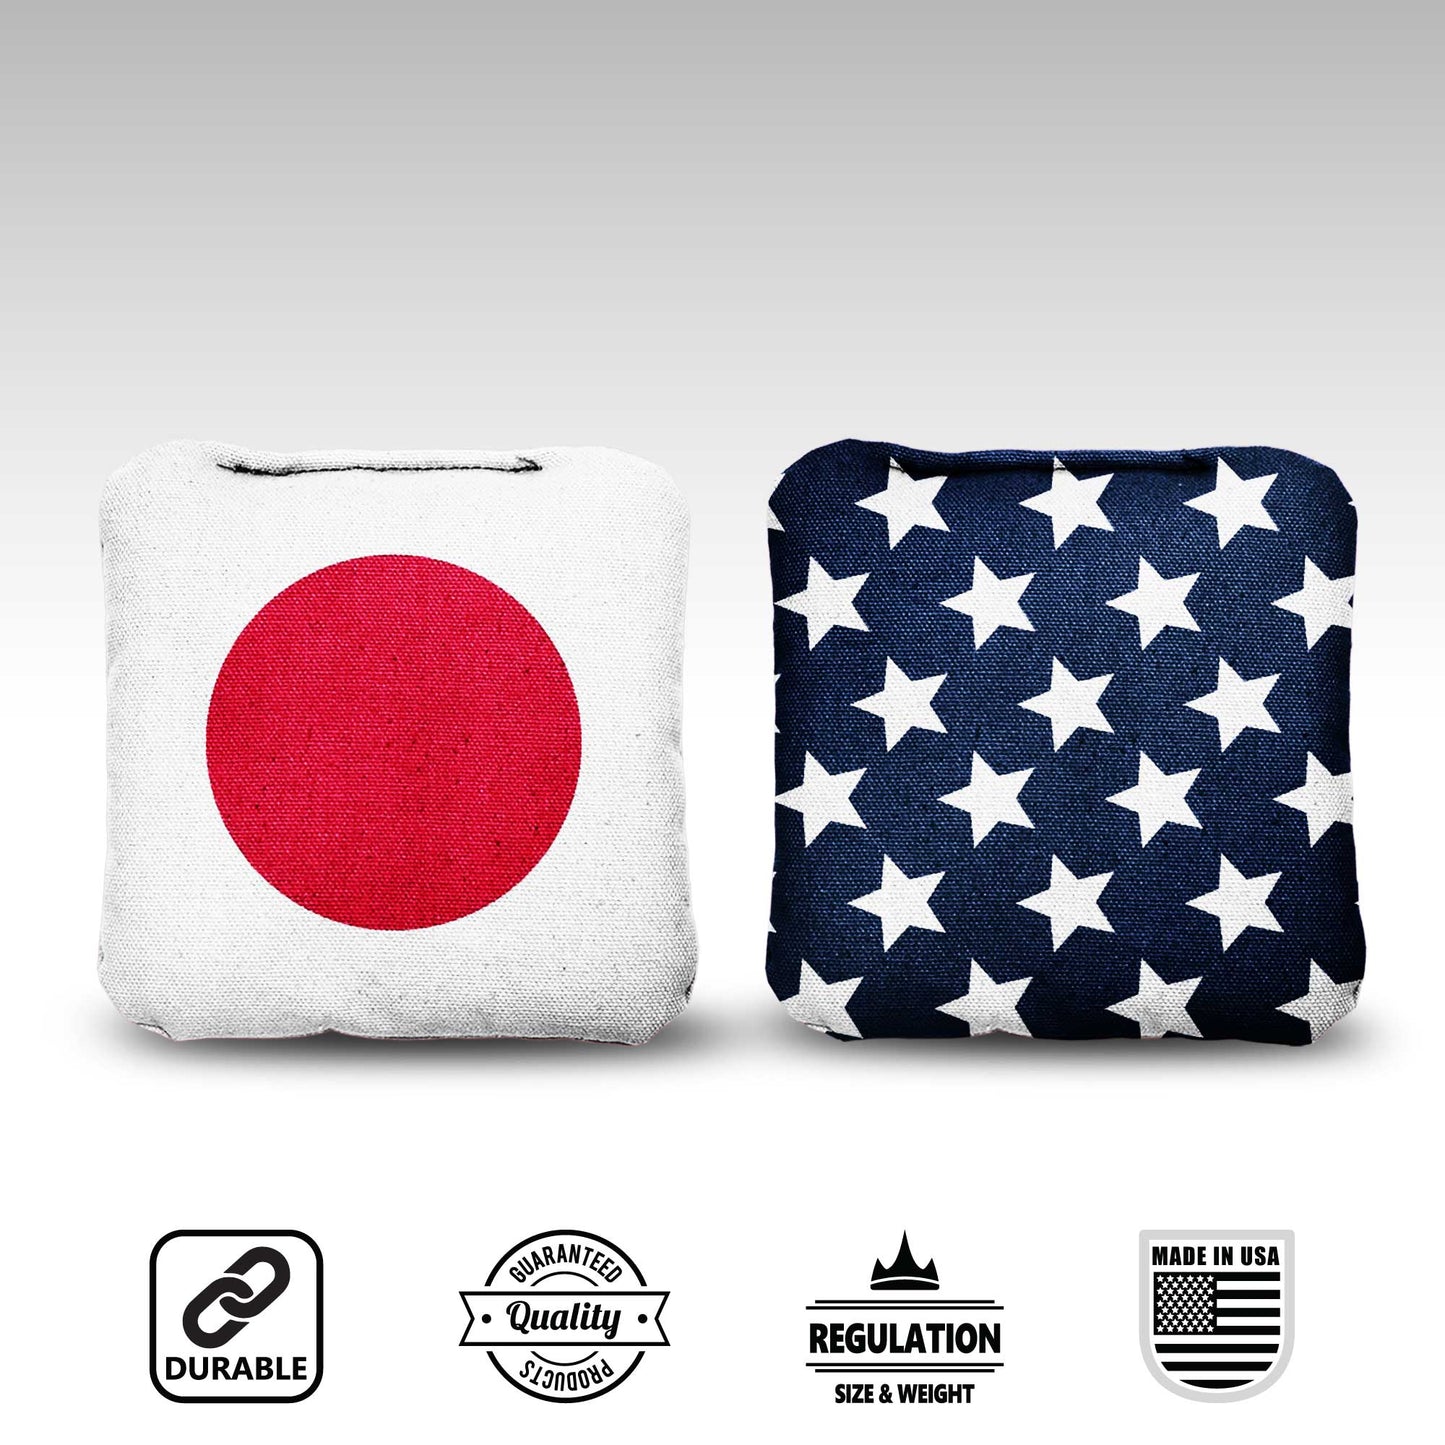 The Japanese and Mericas - 8 Cornhole Bags